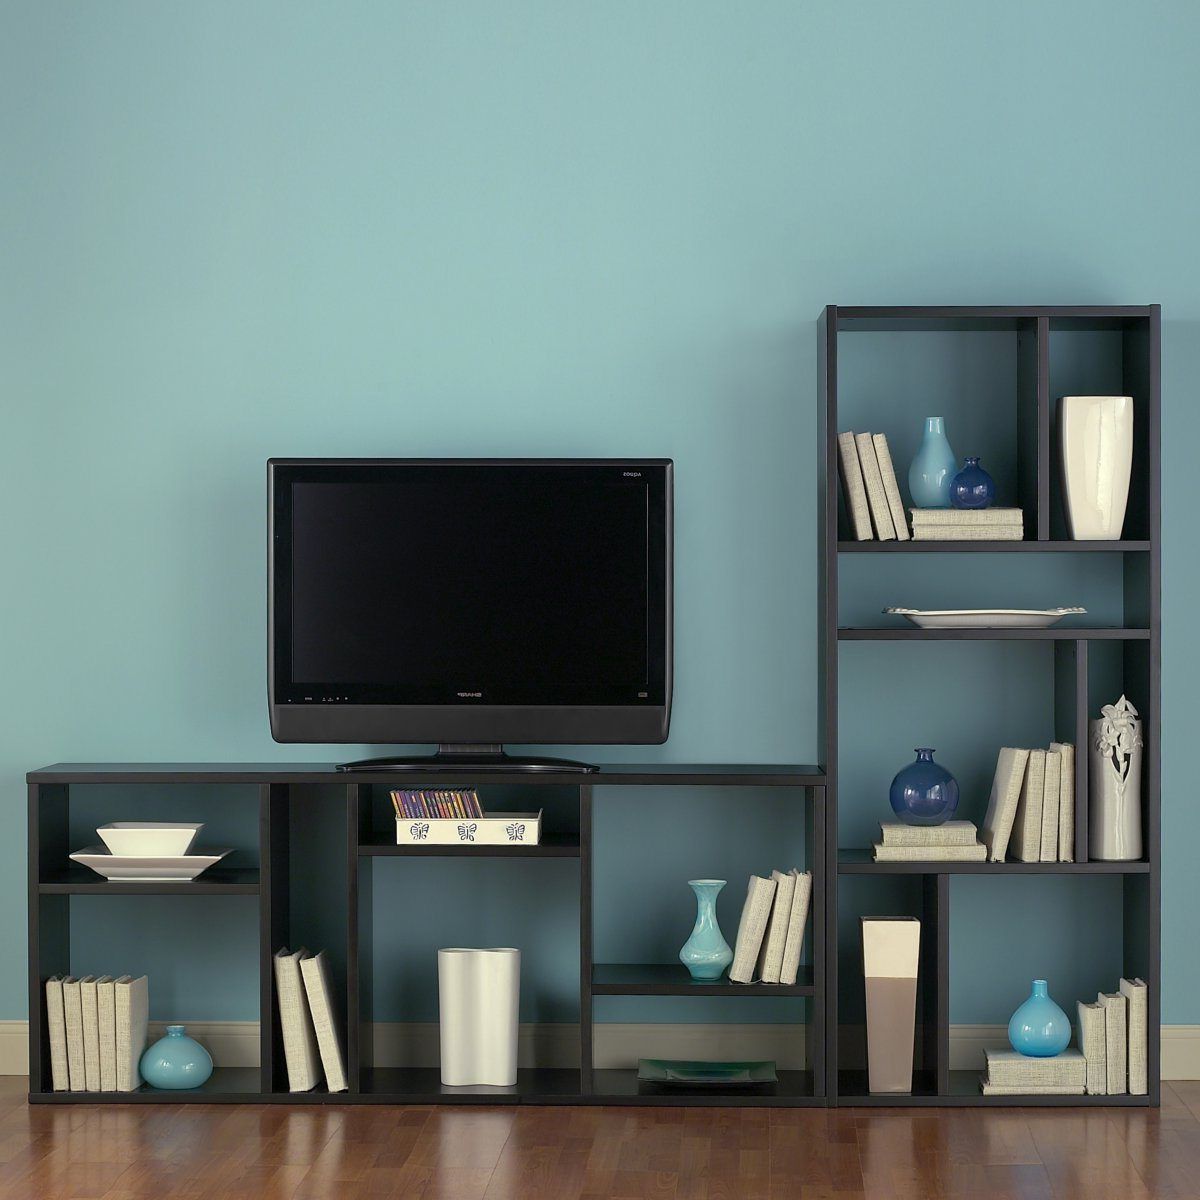 Most Current Tv Stands: Inspire Black And White Tv Stand Bookshelf Design Ideas For Bookshelf And Tv Stands (View 6 of 20)